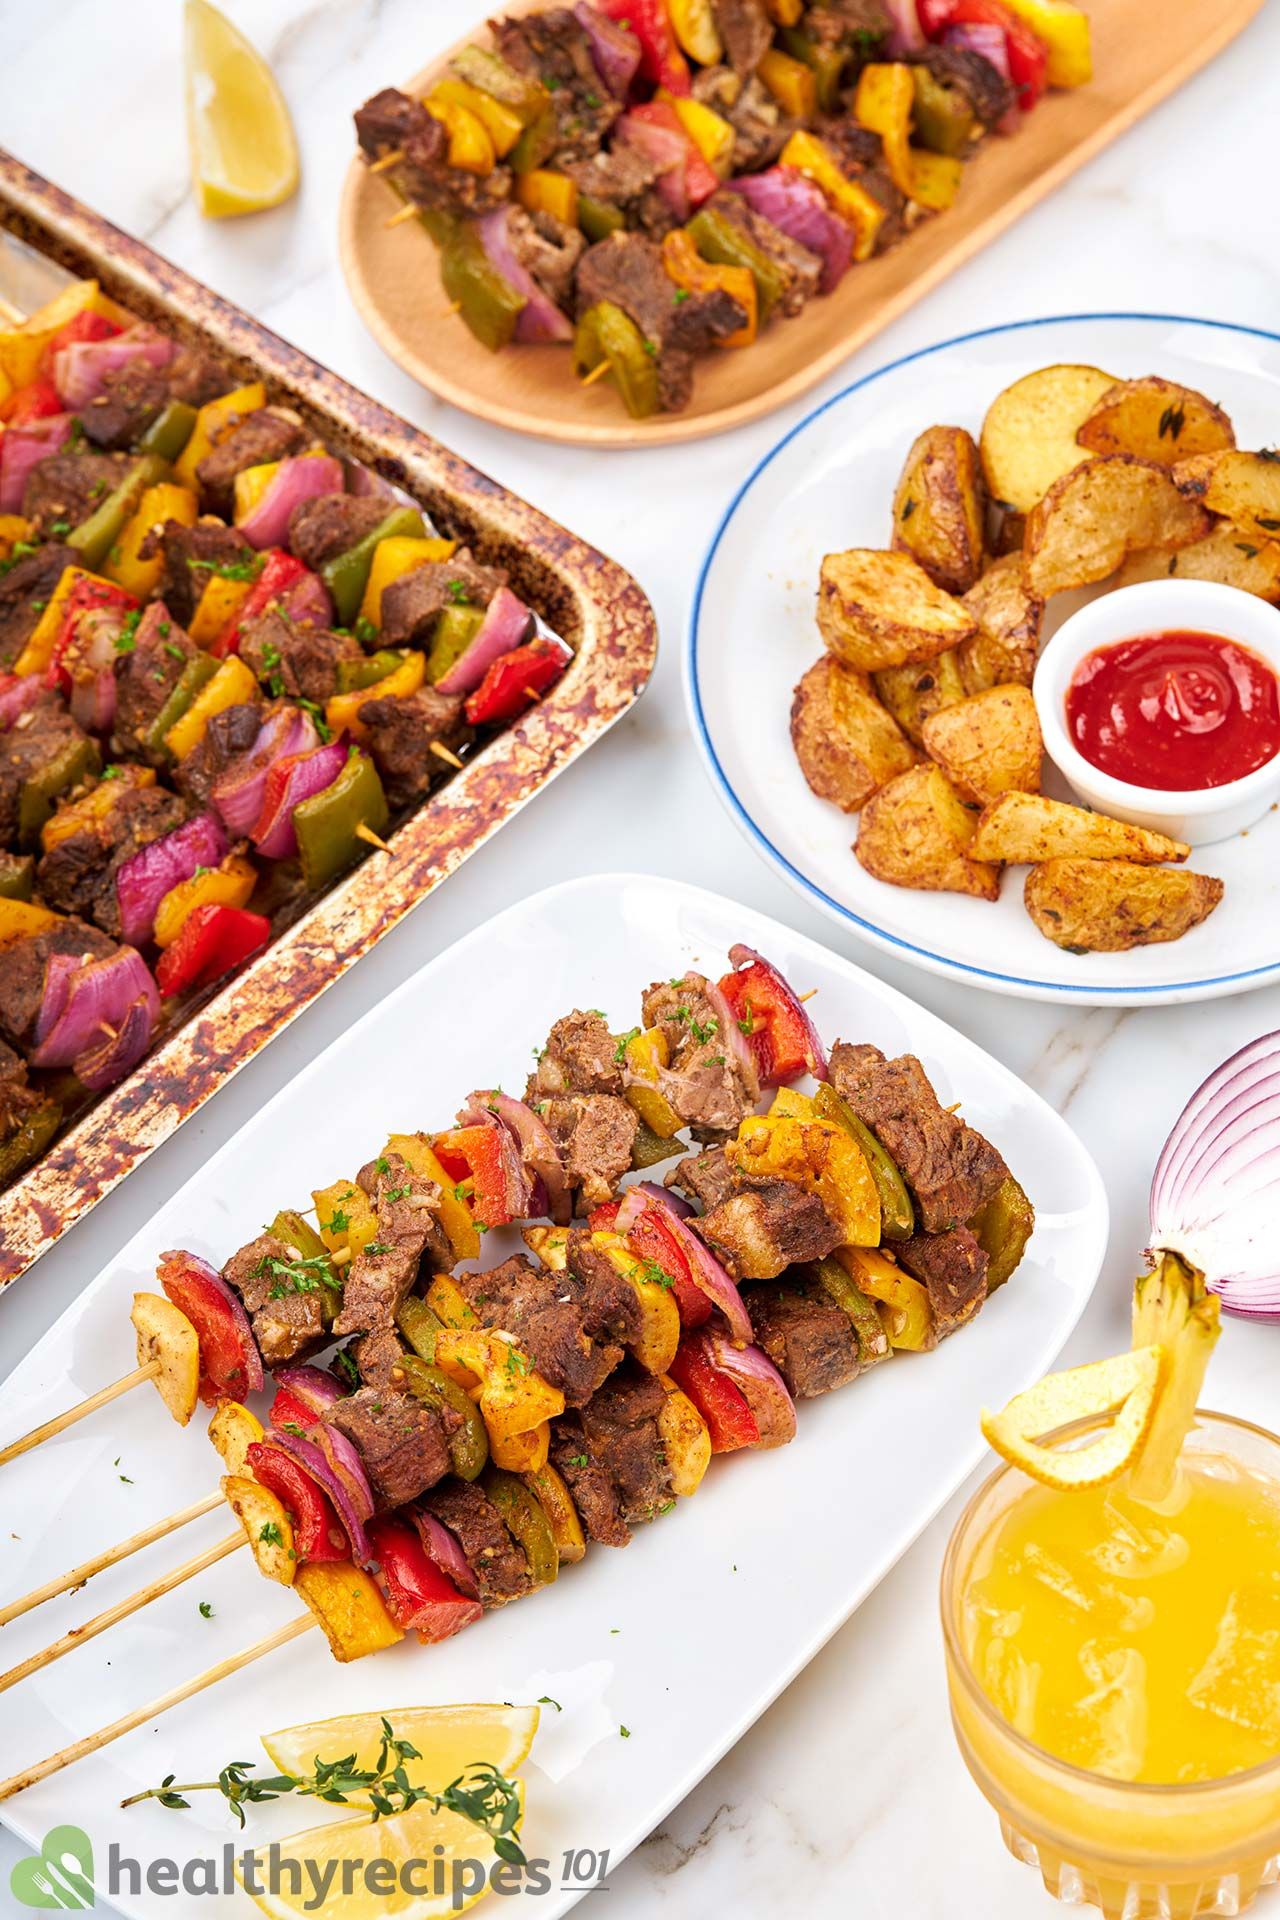 Tips for Making the Best Beef Kebobs